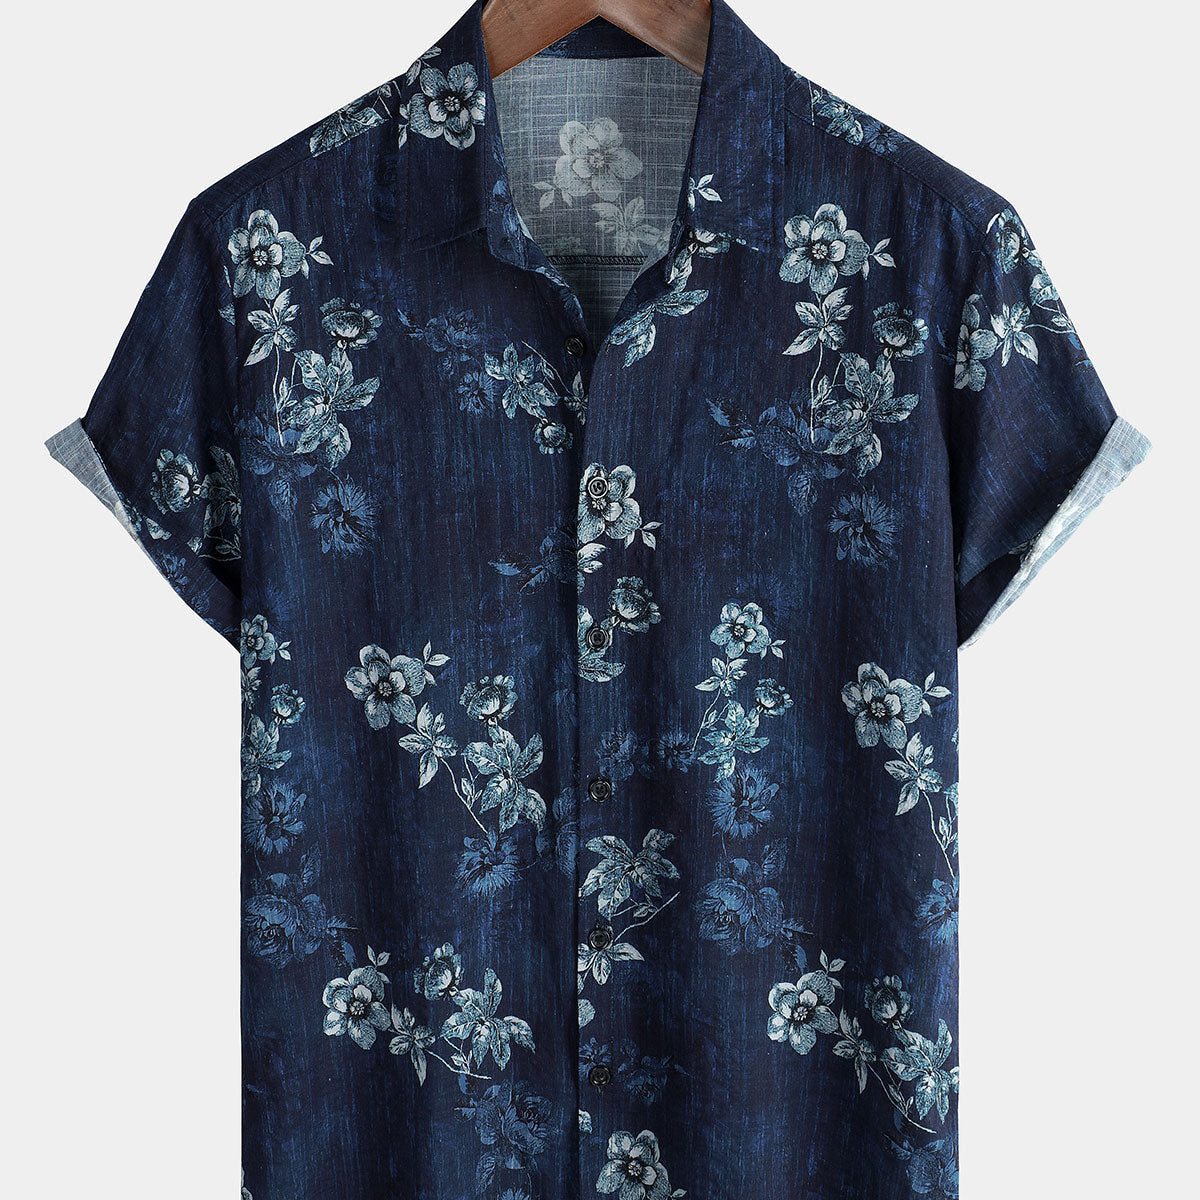 Men's Holiday Casual Floral Print Cotton Short Sleeve Shirt